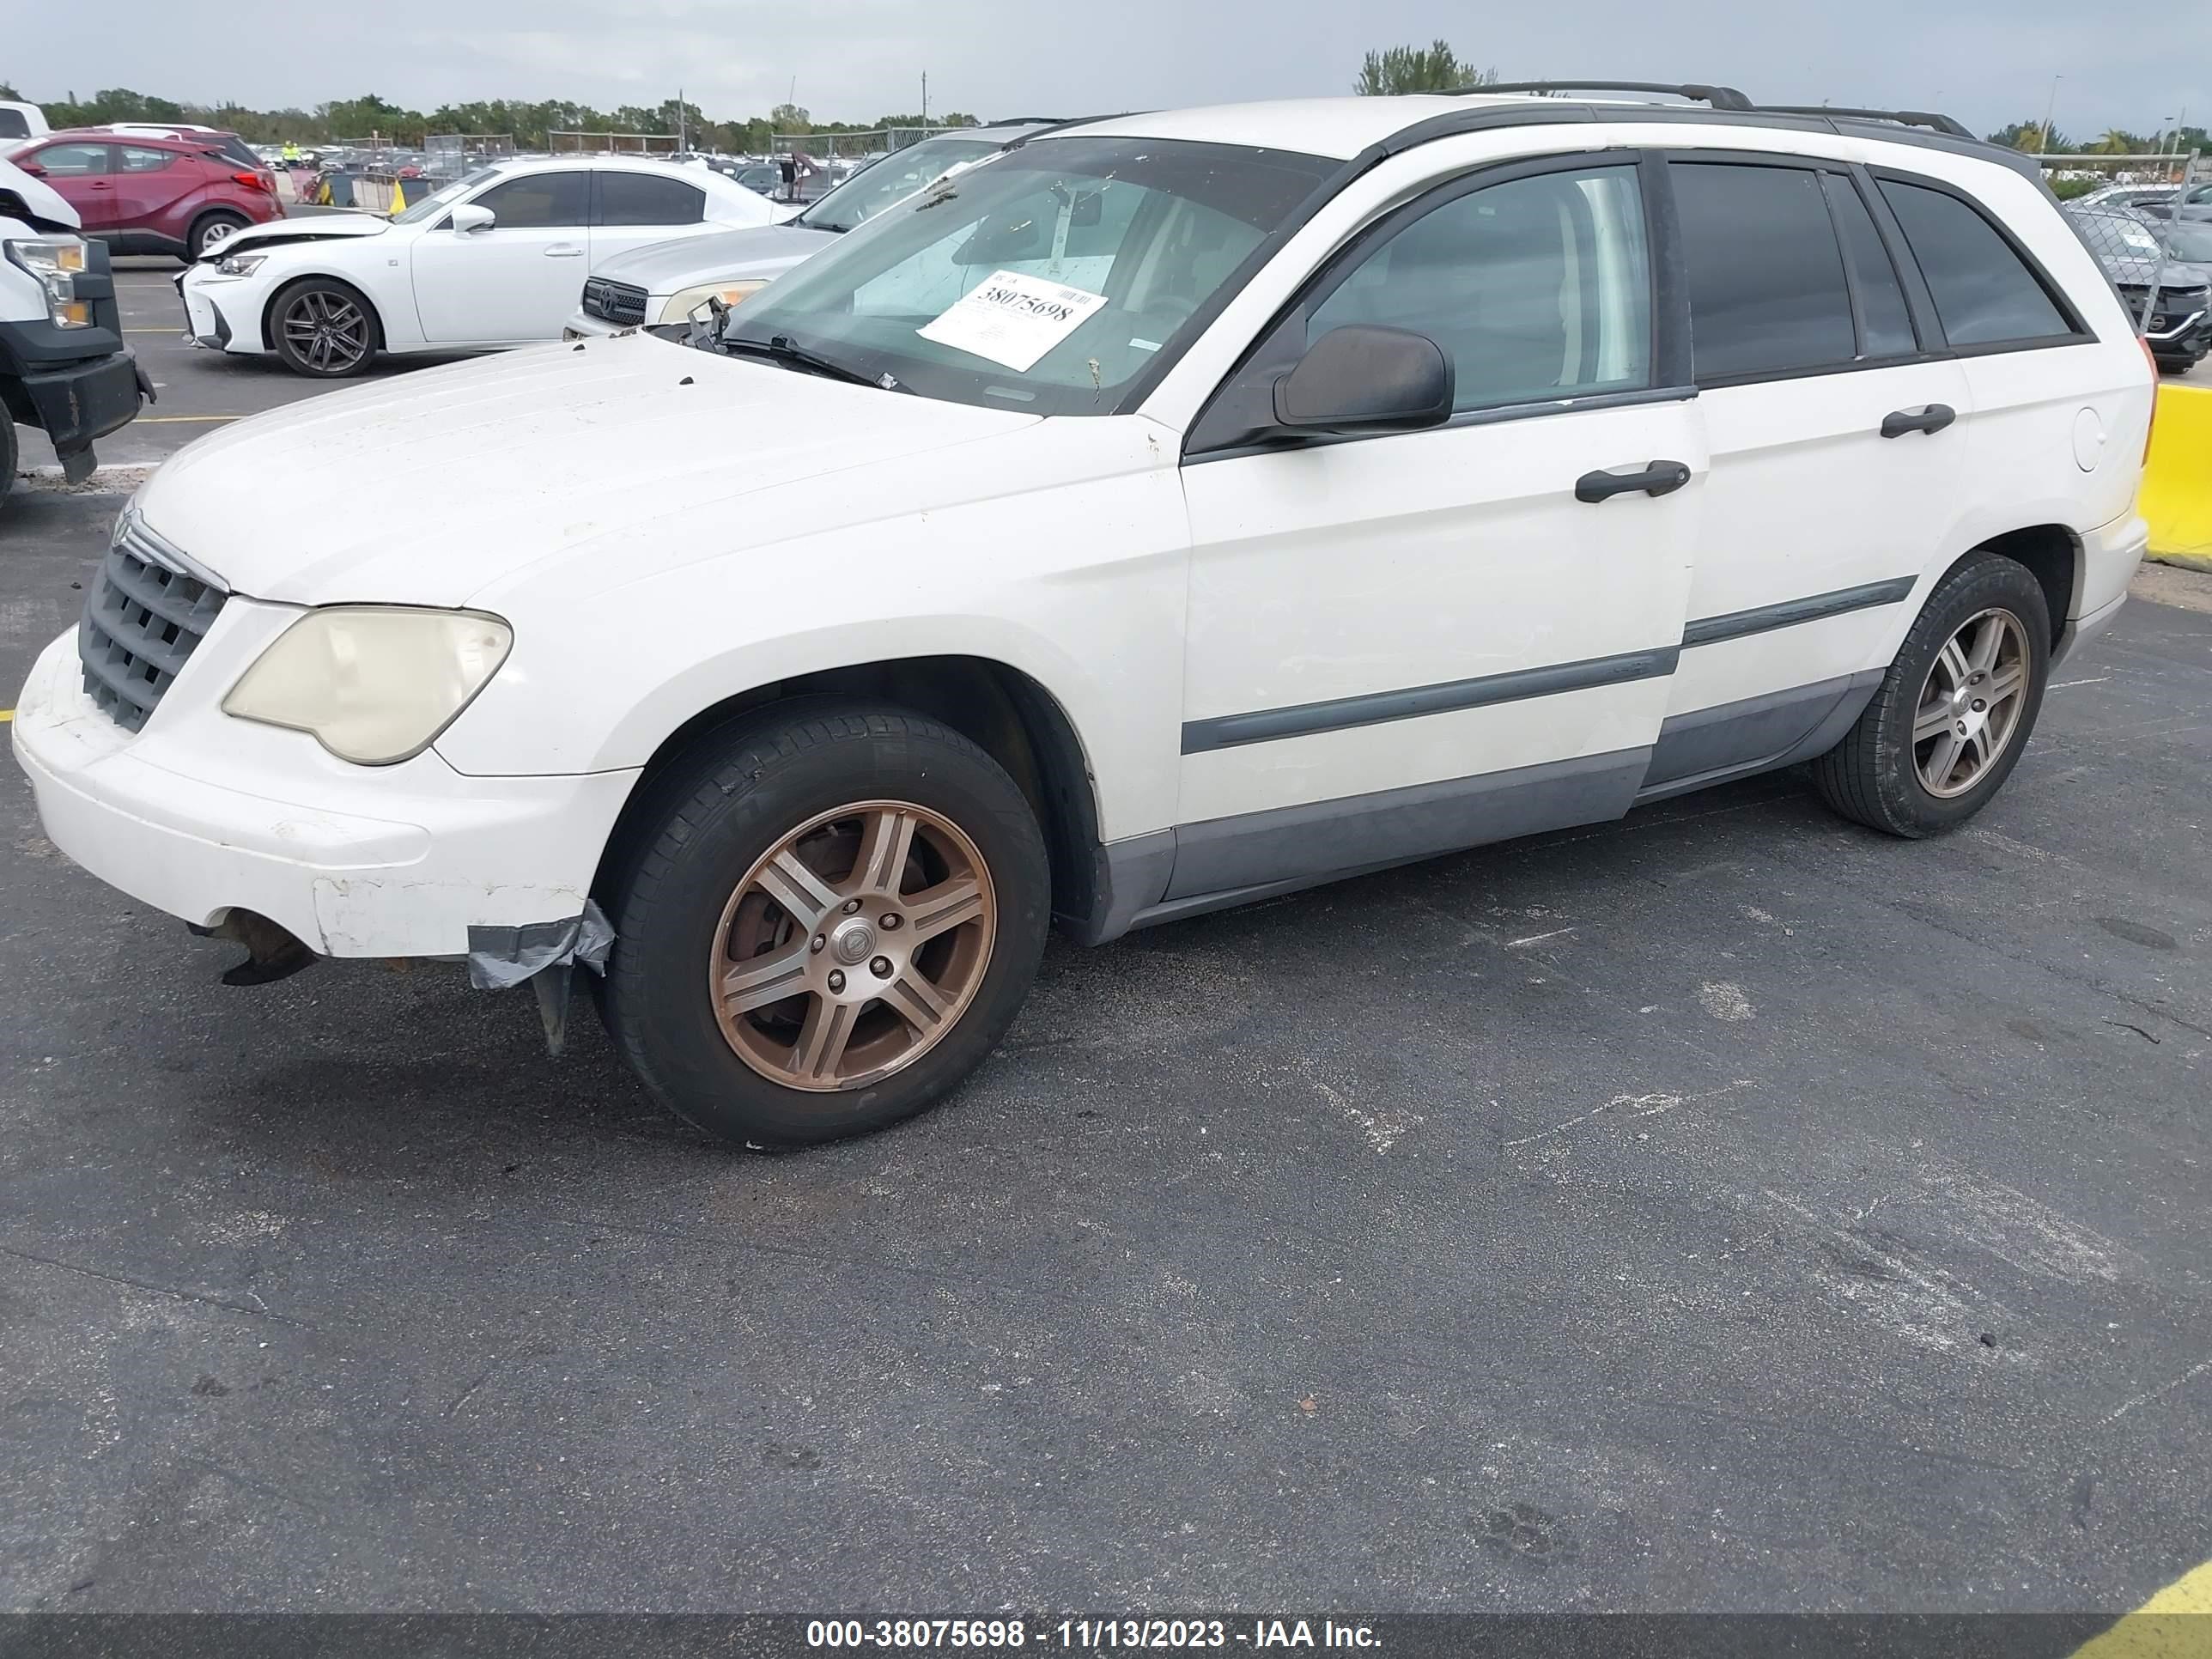 2A8GM48L18R657845  - CHRYSLER PACIFICA  2008 IMG - 1